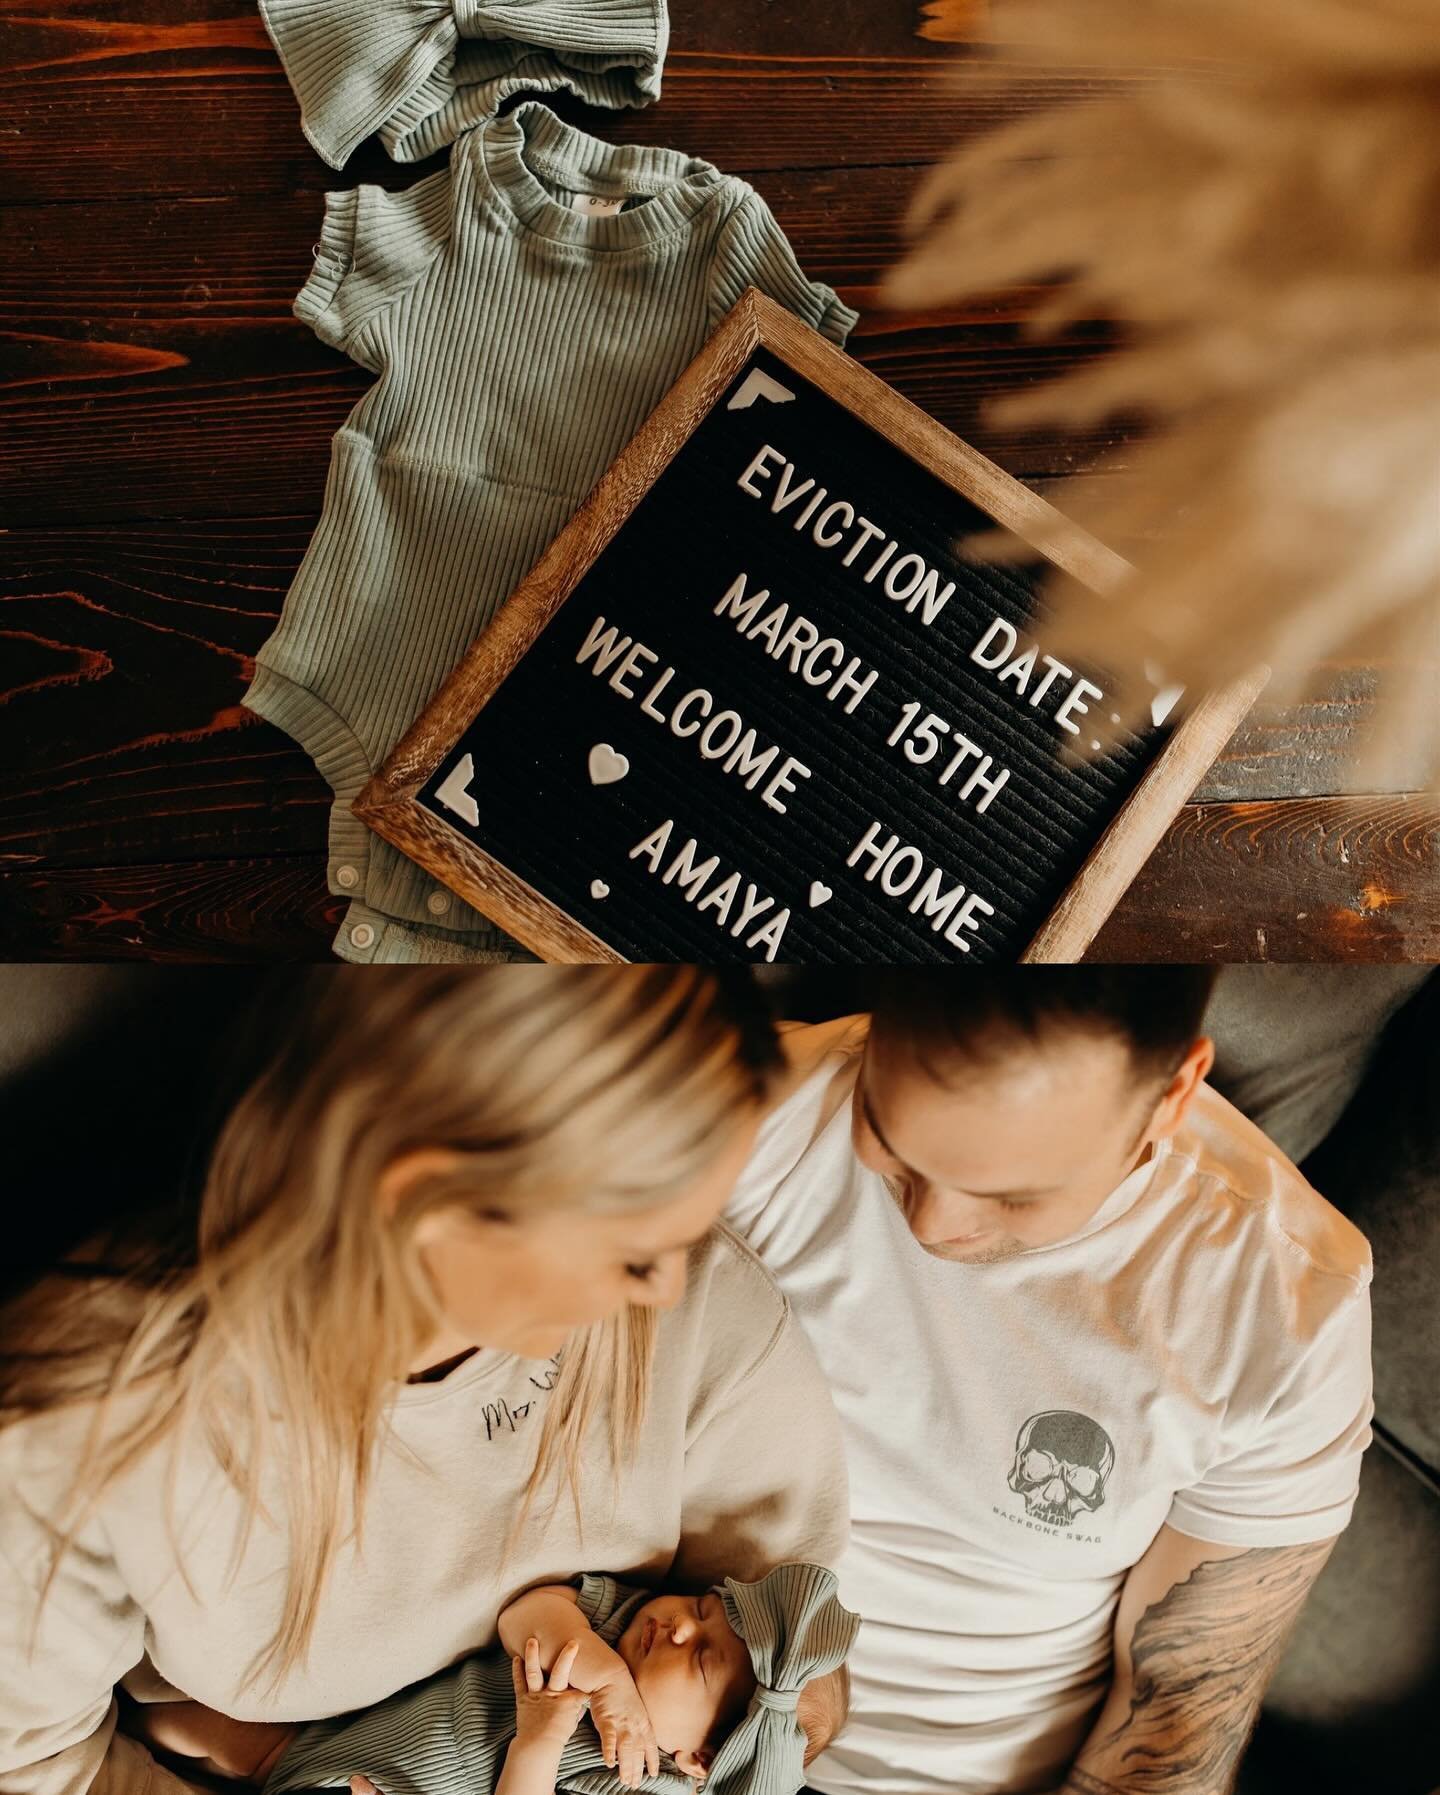 Capturing the precious moments of a sweet newborn&rsquo;s first days at home. Welcome to the world, Baby A. ✨
.
.
.
#NewbornPhotography #LifestyleSession#familyphotography #familyphotos #familylove #horsepoweroflove
#familyphotosession #romance #phot